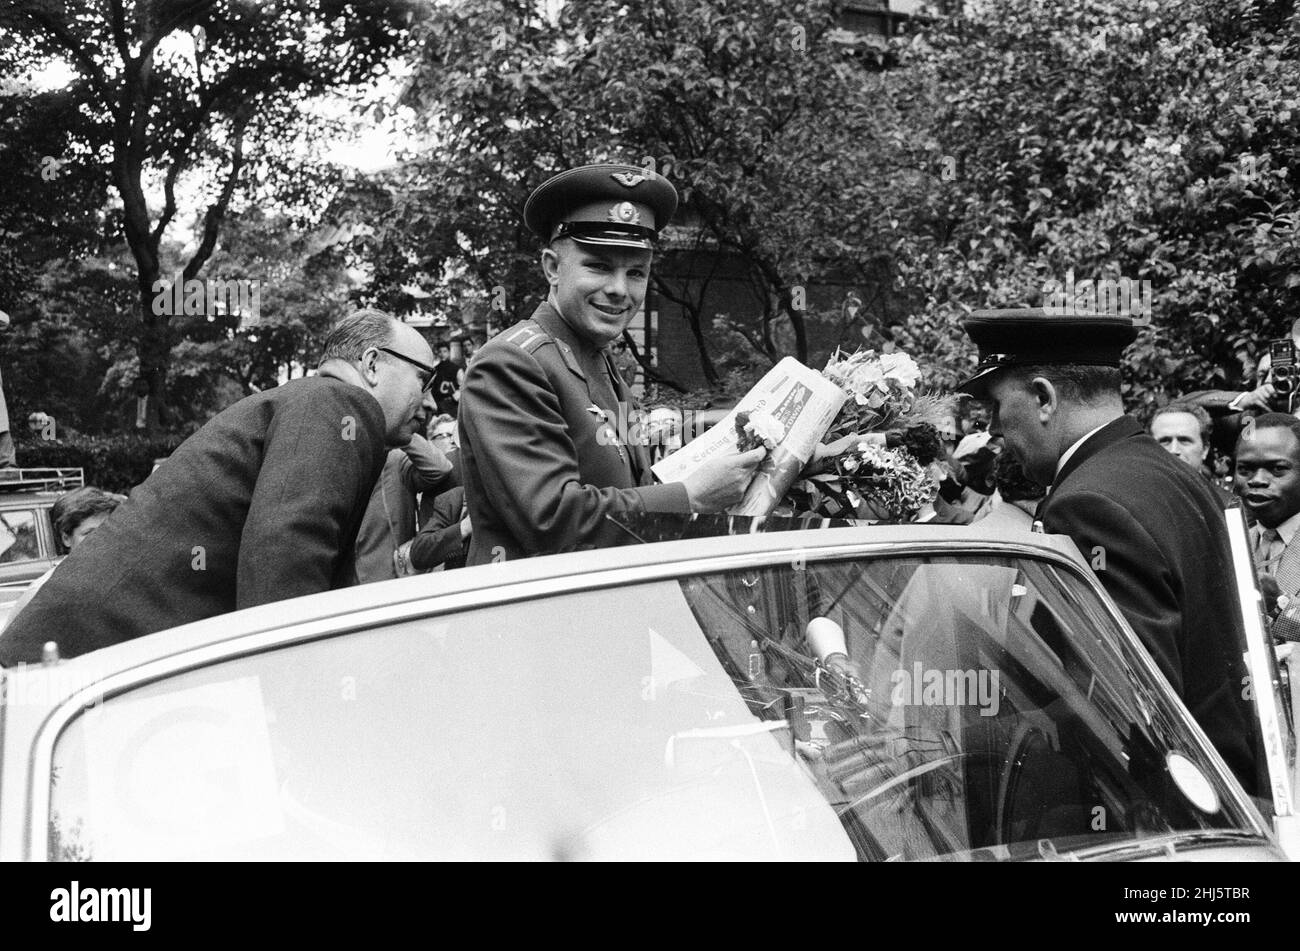 Yuri Gagarin,  Soviet Cosmonaut, the first human to journey into outer space when his Vostok spacecraft completed an orbit of the Earth (12th April 1961), visits Britain, Tuesday 11th July 1961. Our picture shows ... Yuri Gagarin is greeted by large welcoming crowds of people in the grounds of the Russian Embassy in Kensington Palace Gardens. Stock Photo